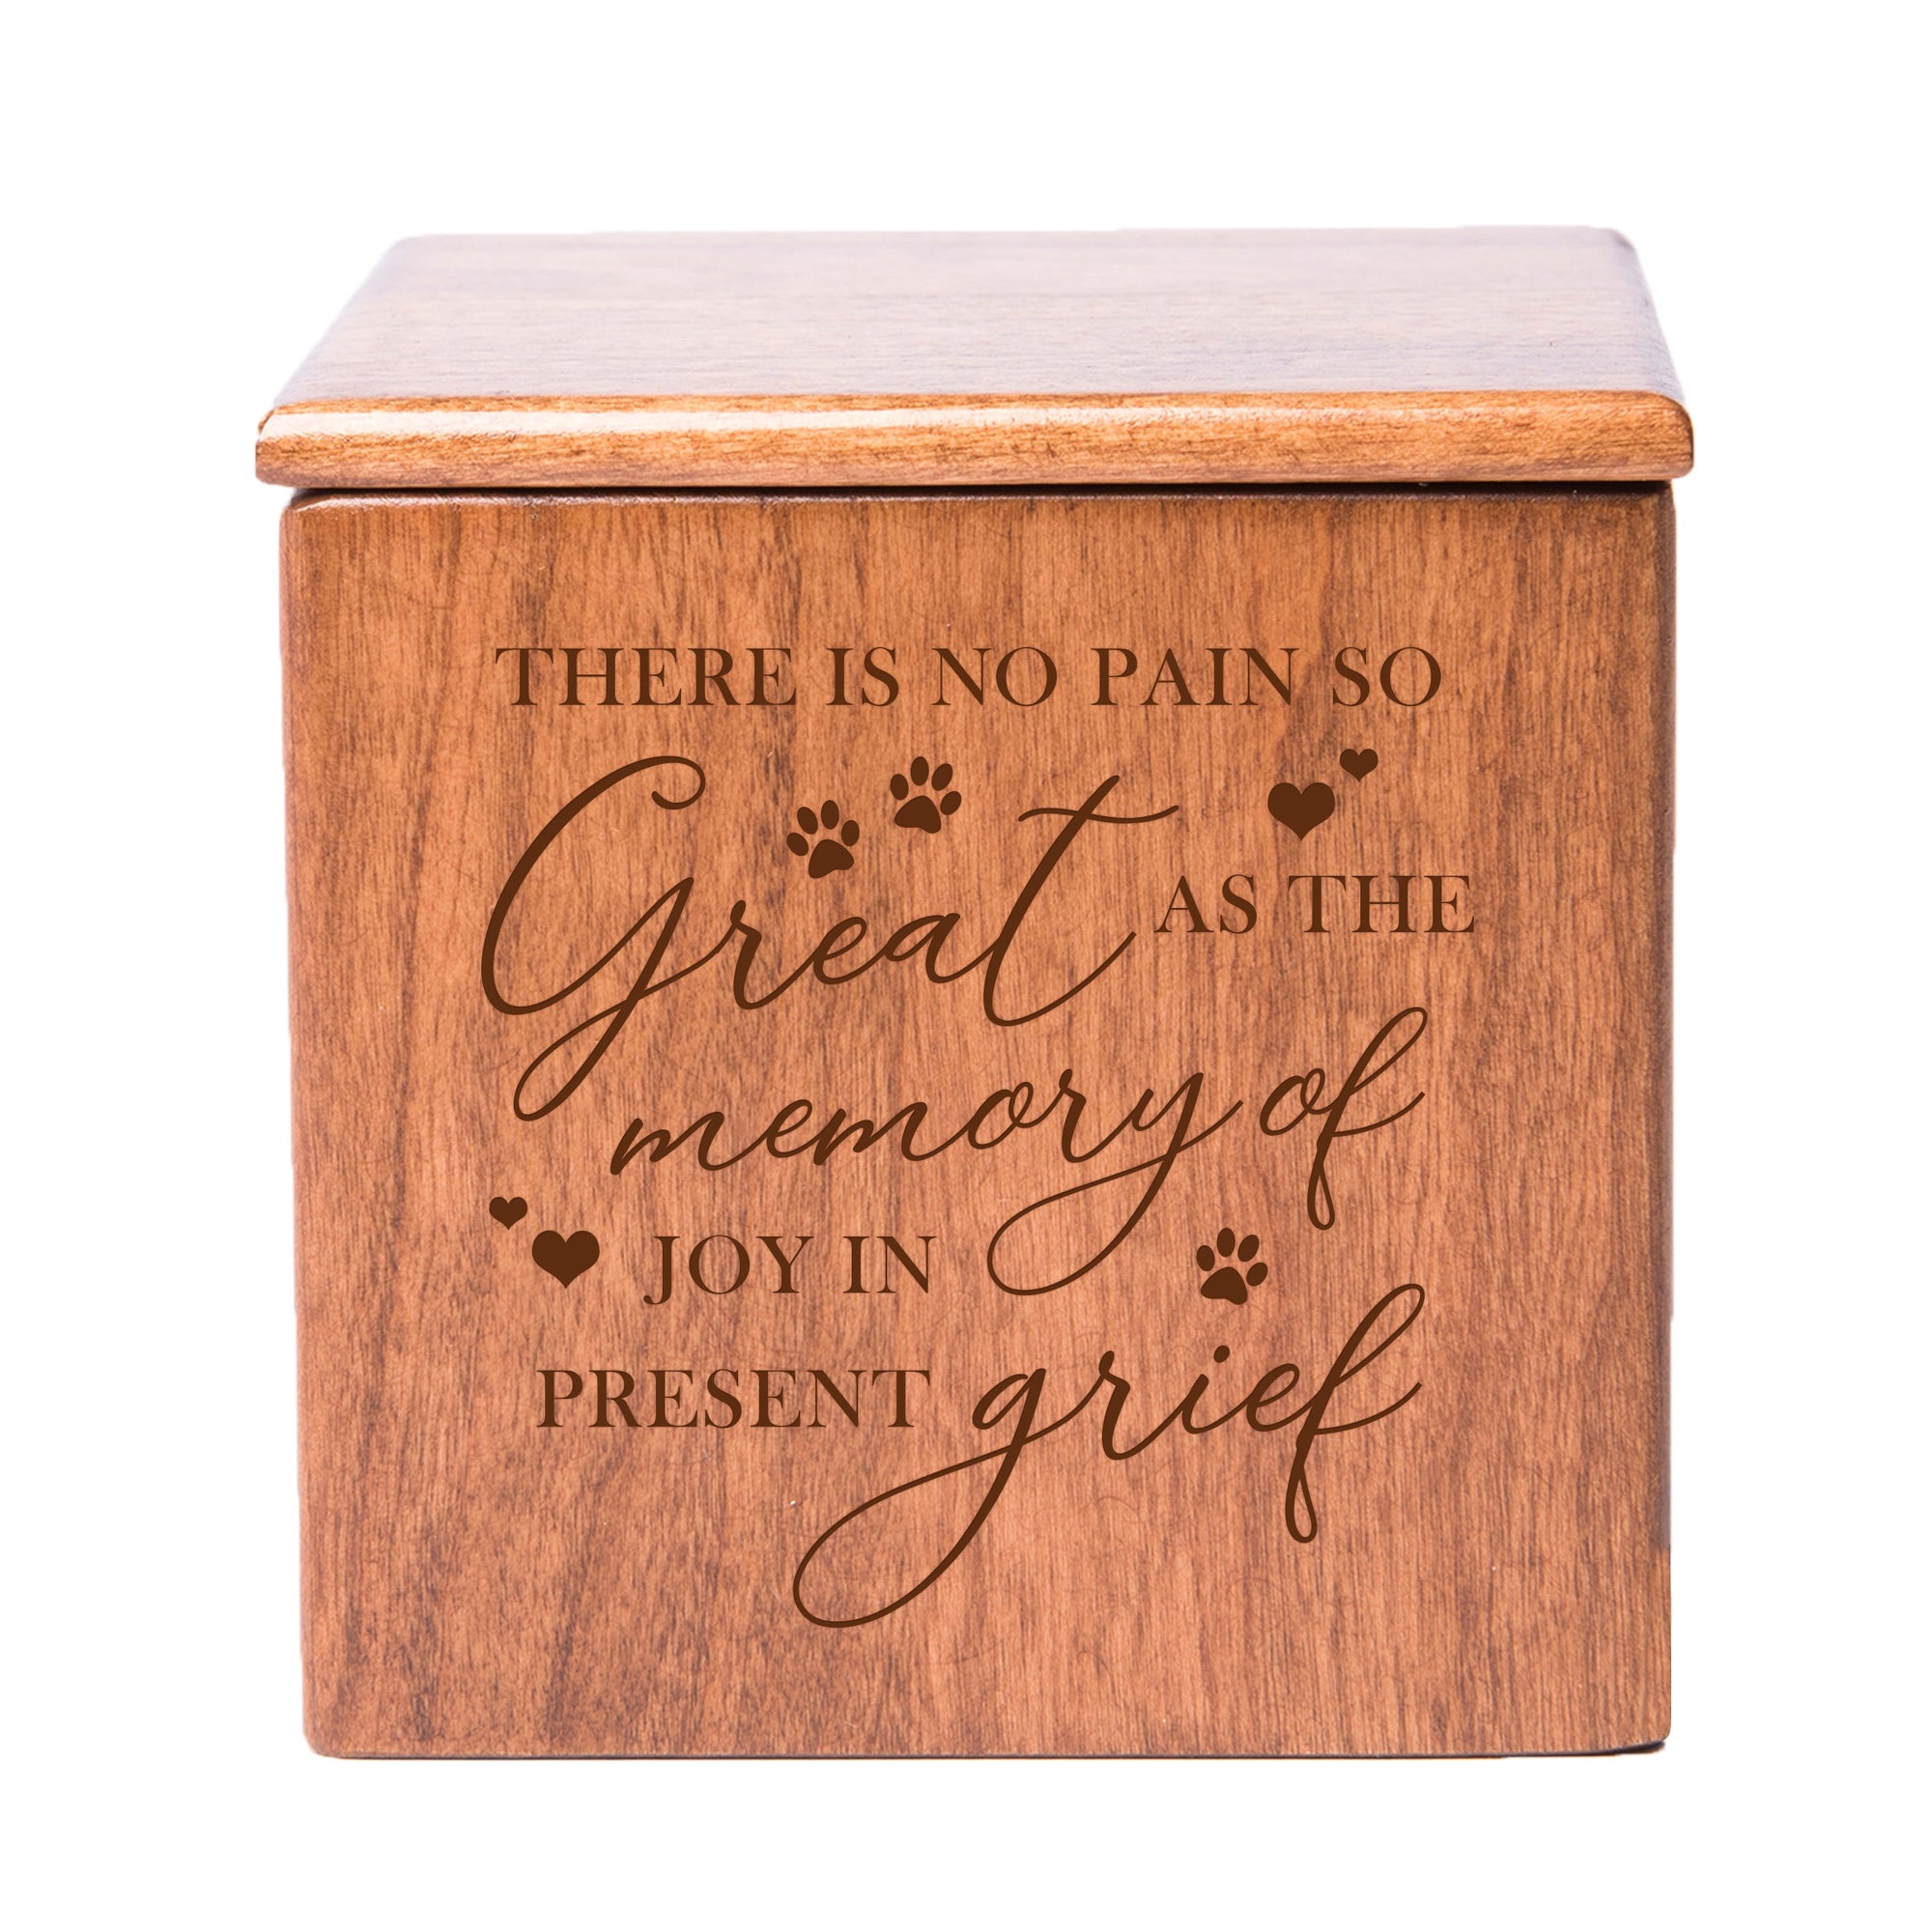 Pet Memorial Keepsake Cremation Urn Box for Dog or Cat - There Is No Pain So Great